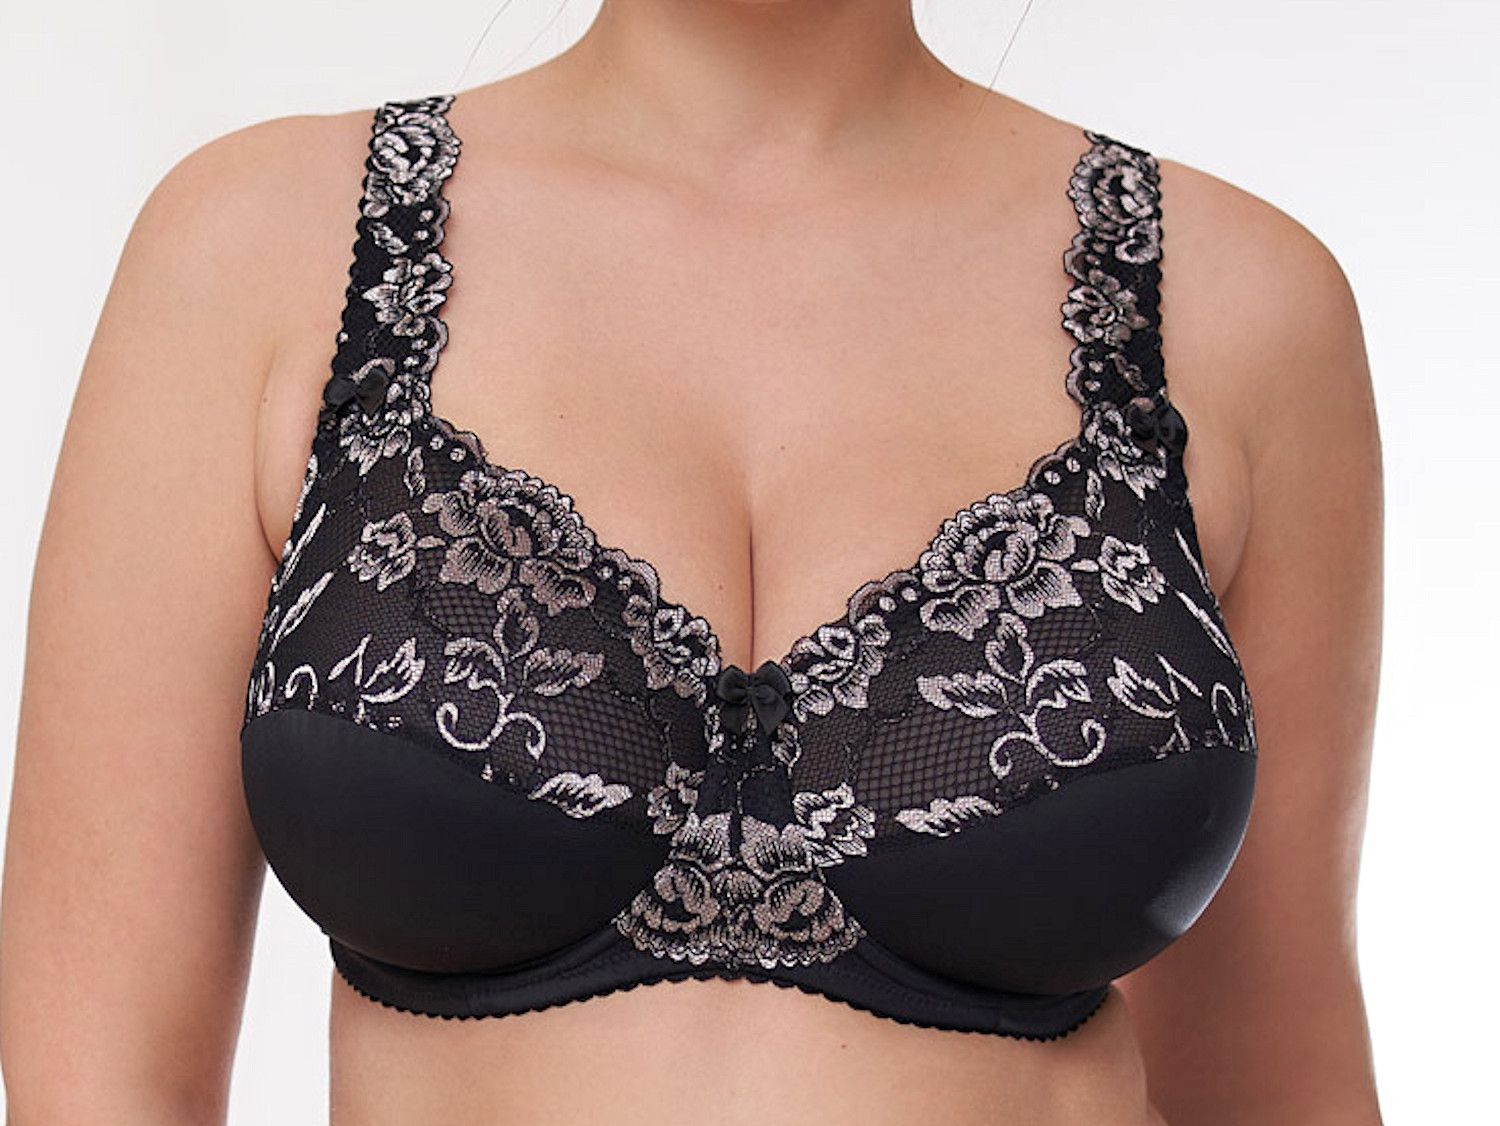  Womens Floral Lace Bra Plus Size Firm Hold Non Wired Non  Padded Full Coverage Minimizer 32DDD Gray